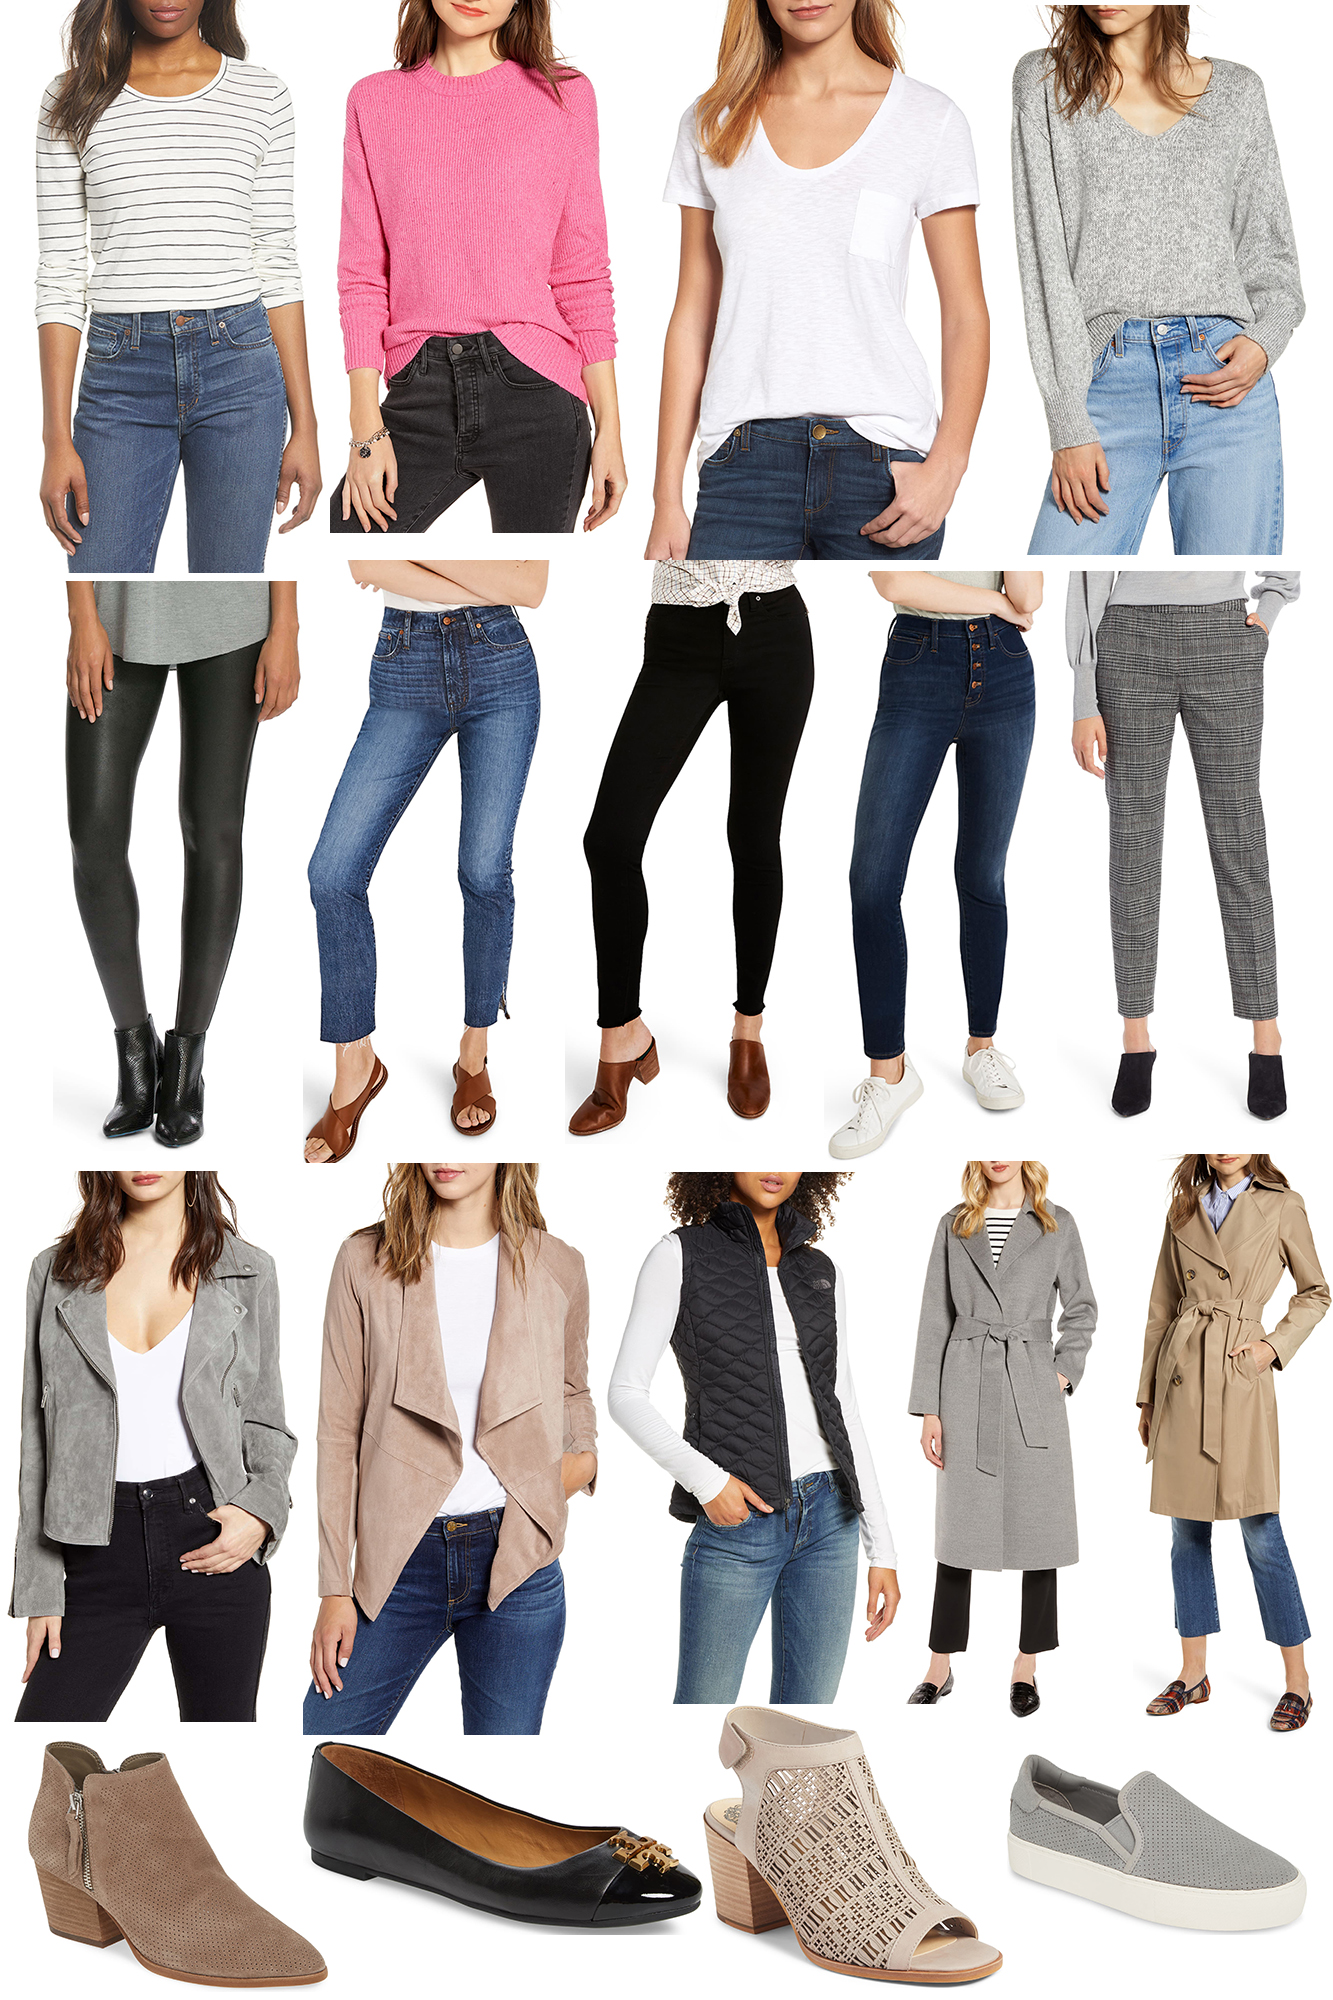 Nordstrom Anniversary Sale 2019 Shopping Guide - Sourcing and linking all my favorites from the NSale. Must-haves and things to skip. | Kristy Wicks